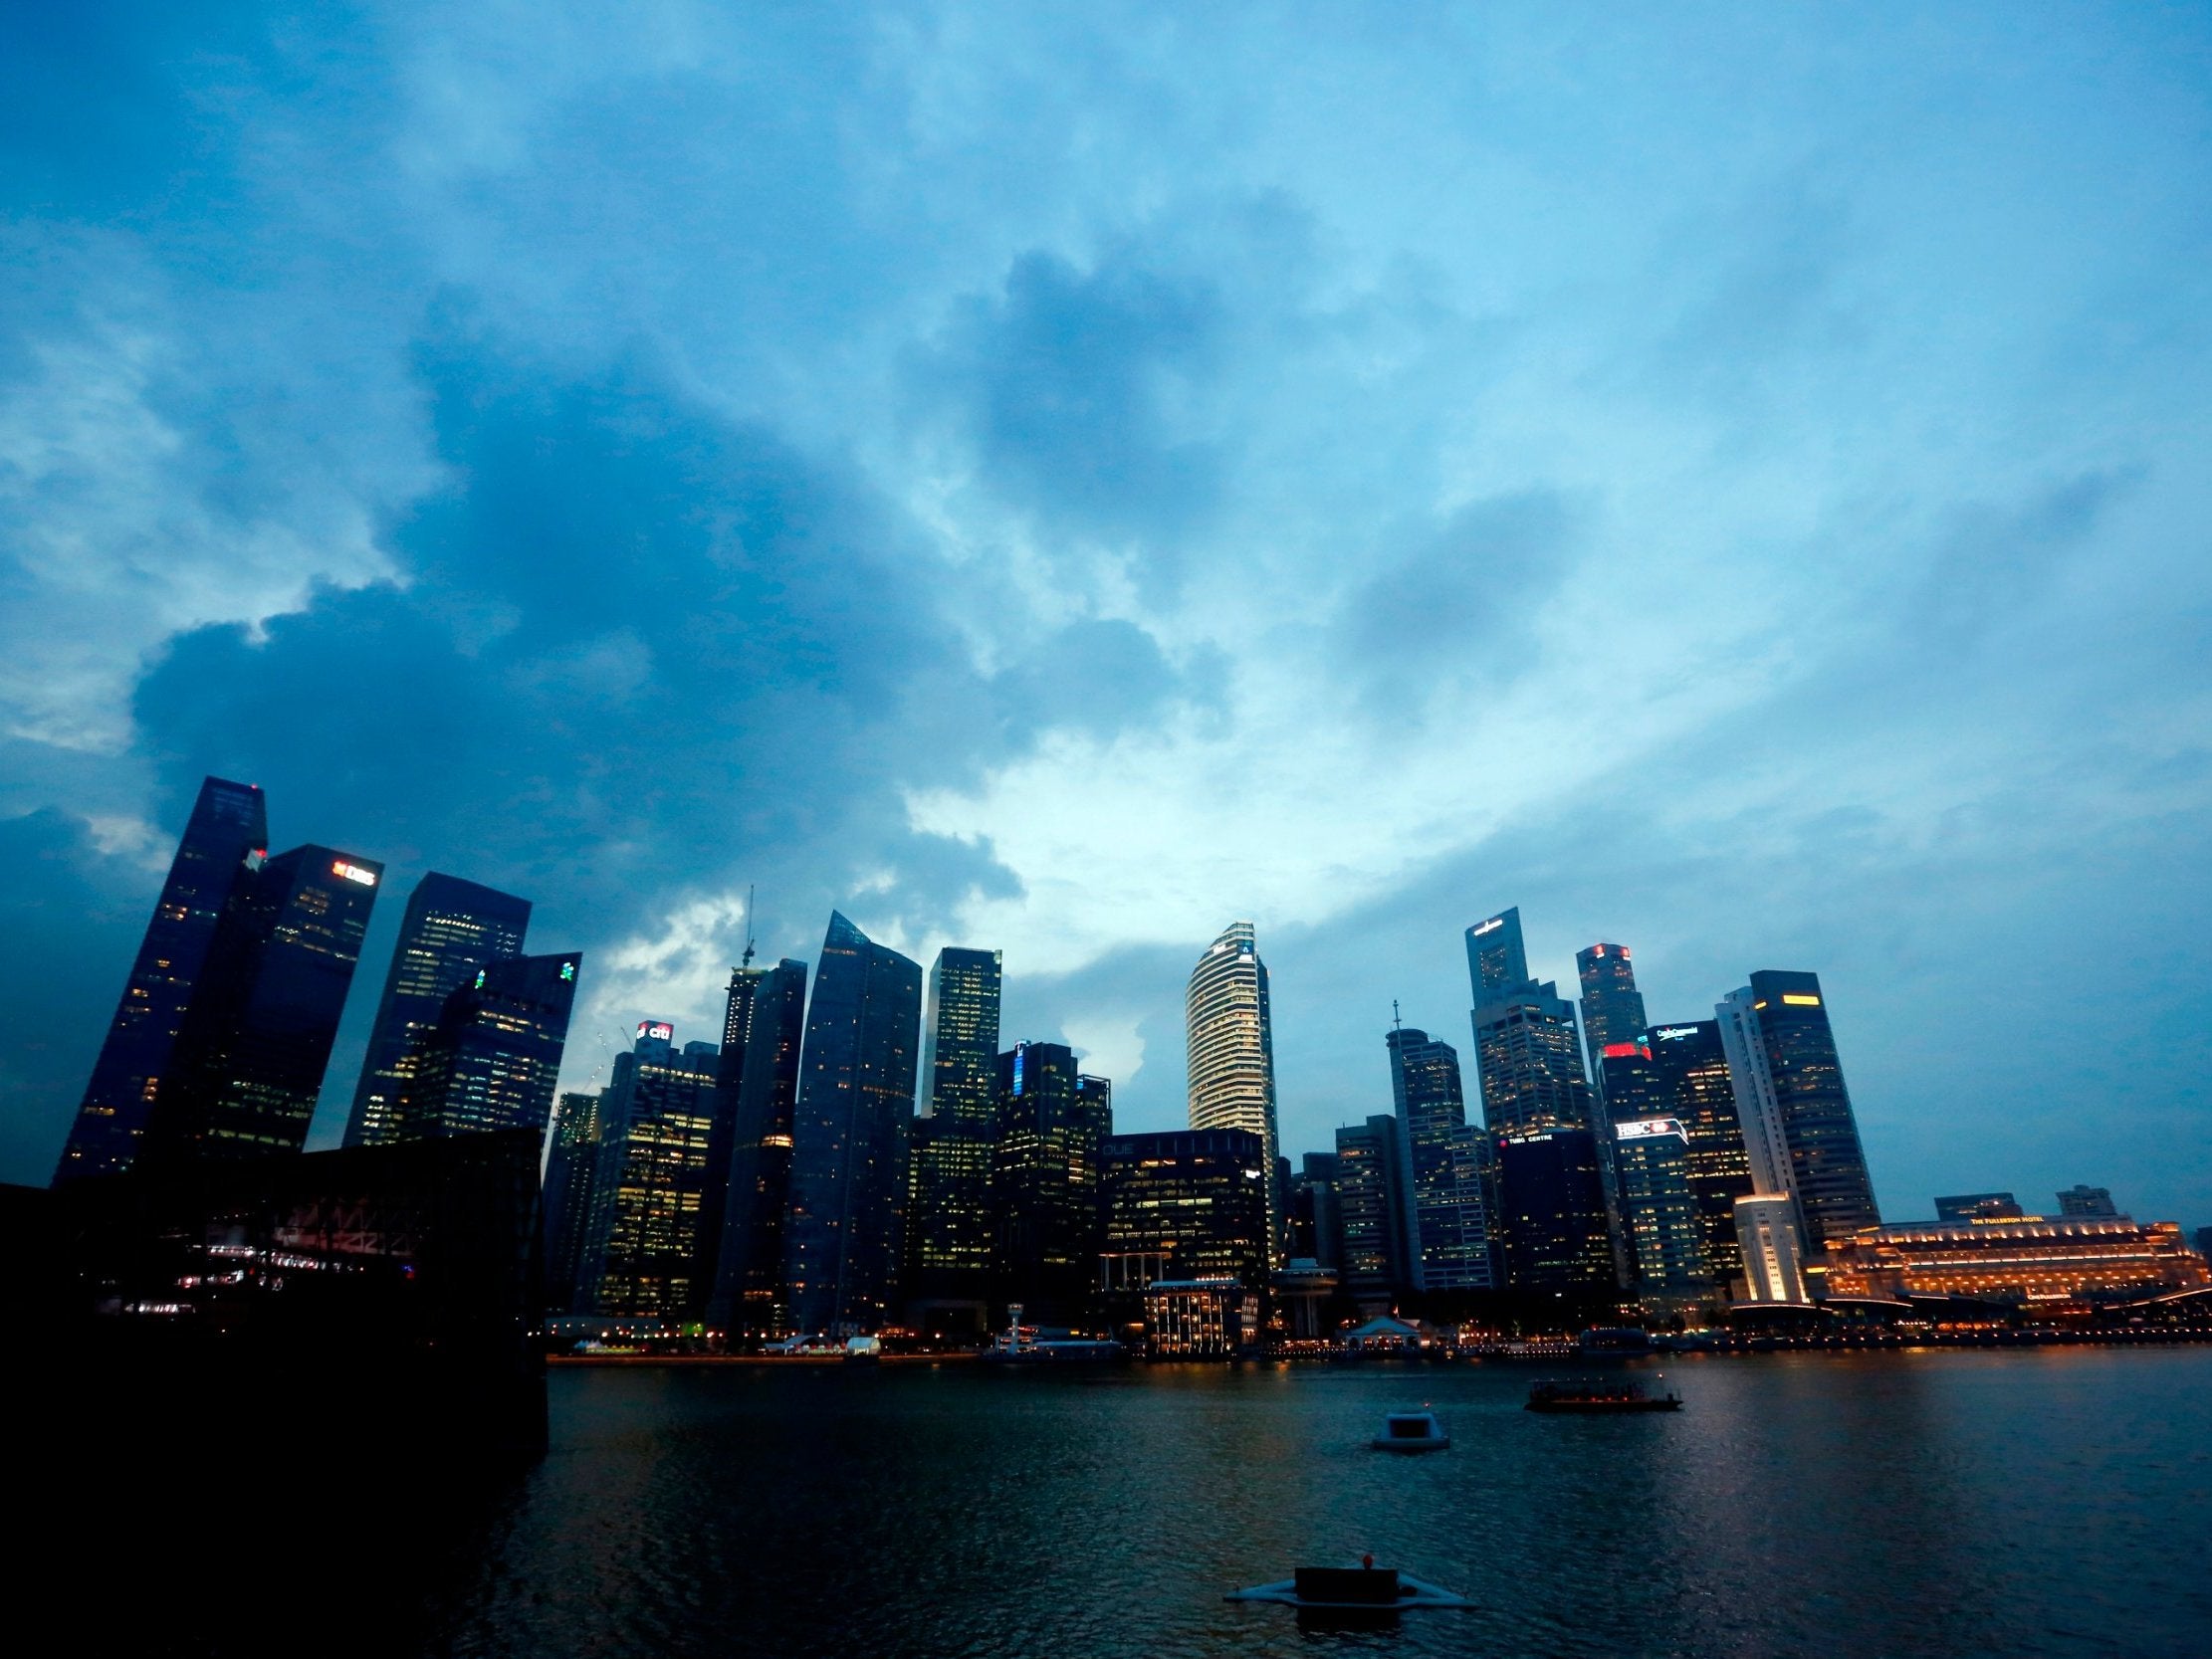 Data on more than a quarter of Singapore's population was stolen in a major cyber attack